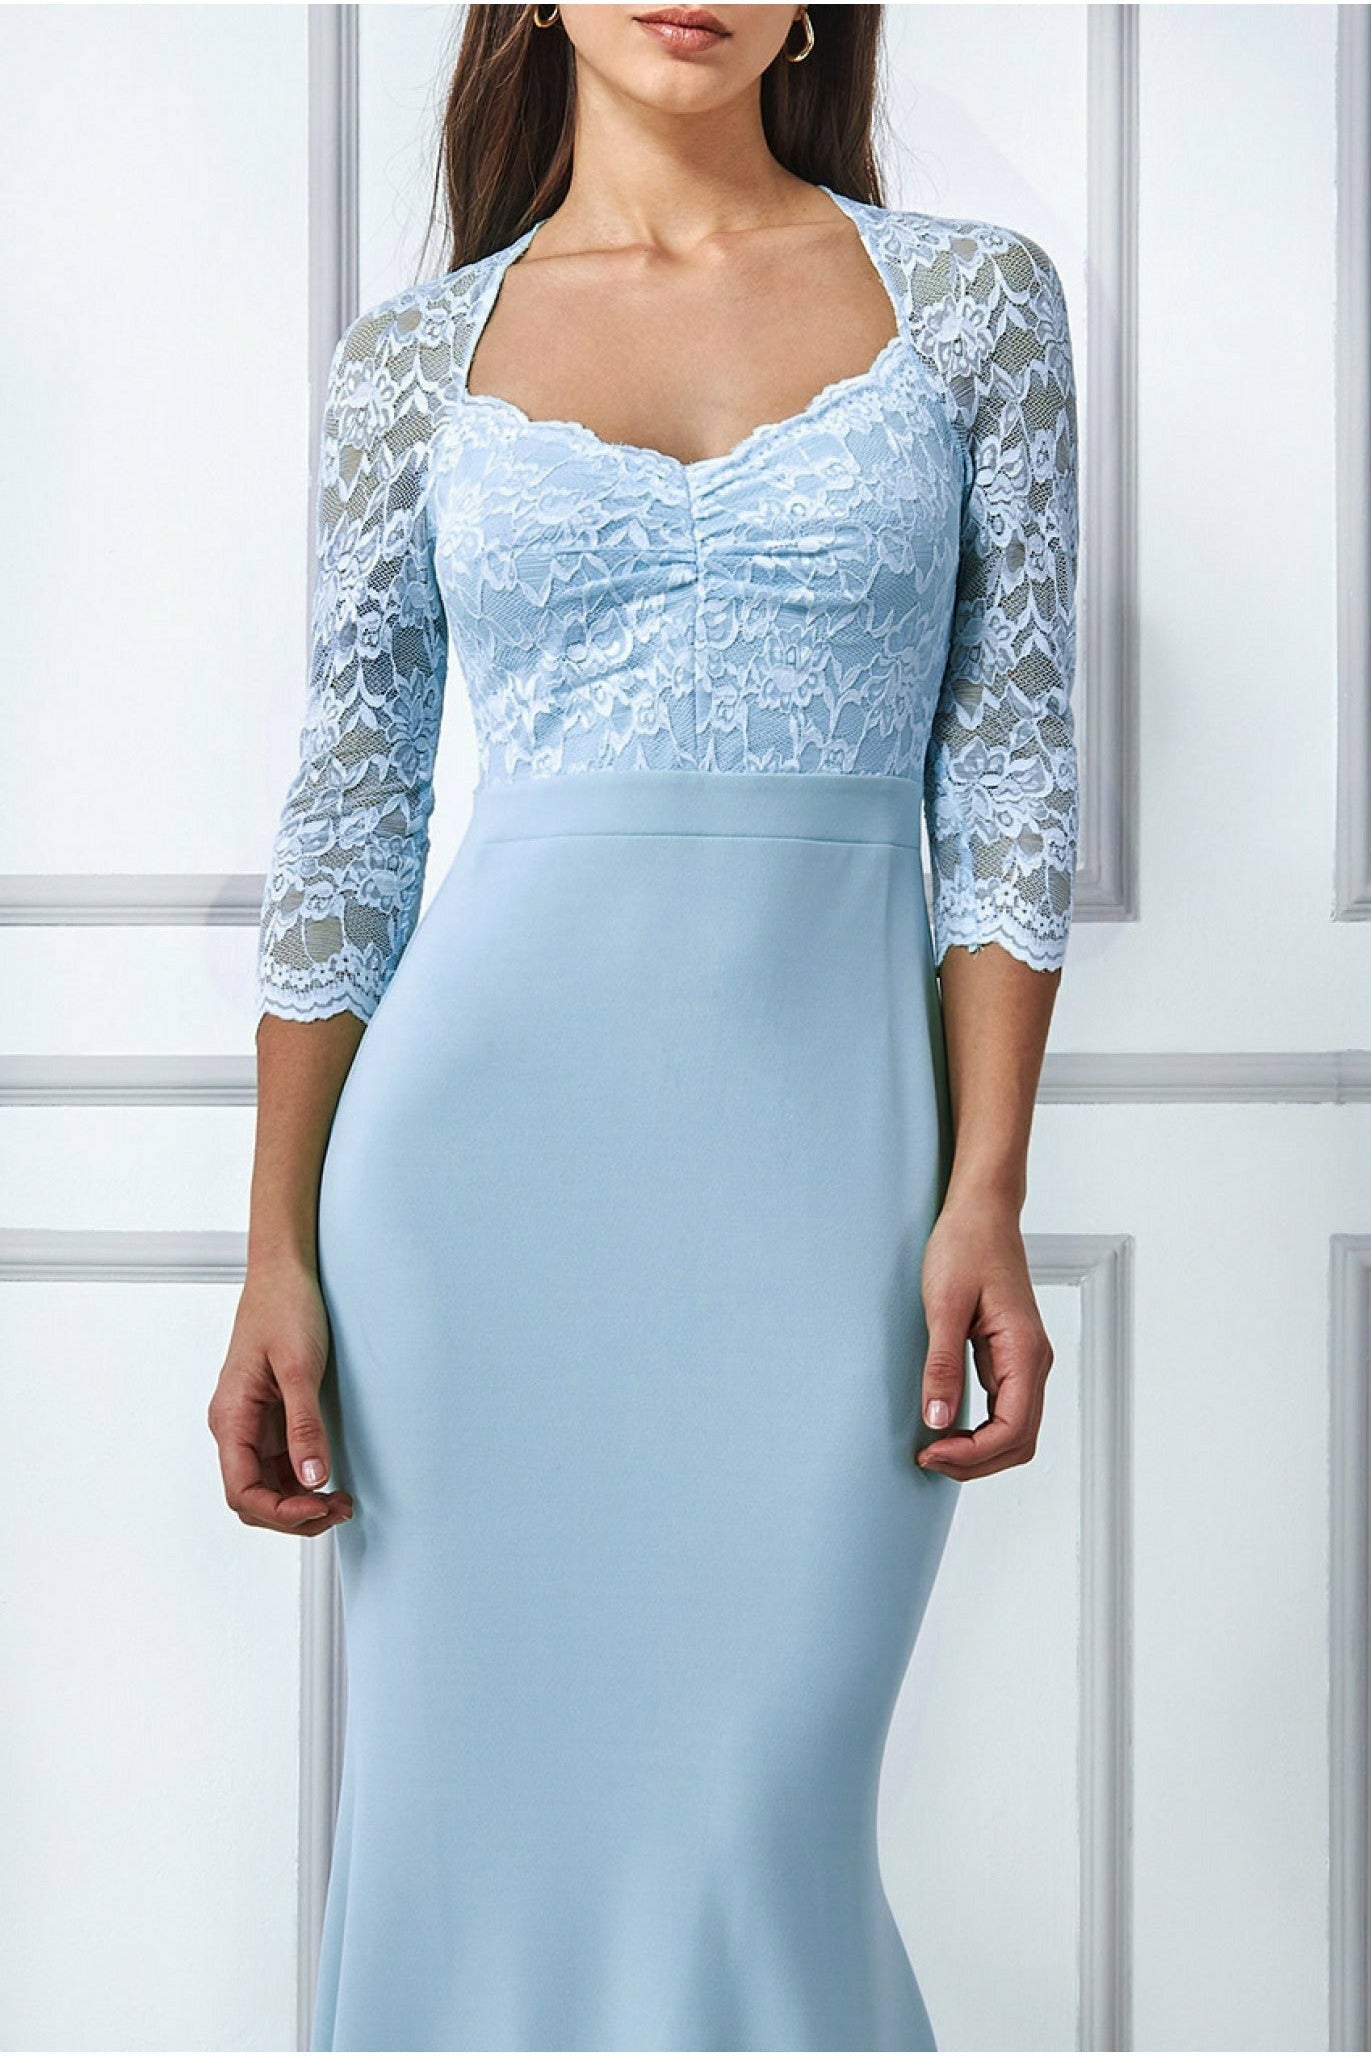 Lace Bodice Maxi Dress With Sleeves - Powder Blue DR1551